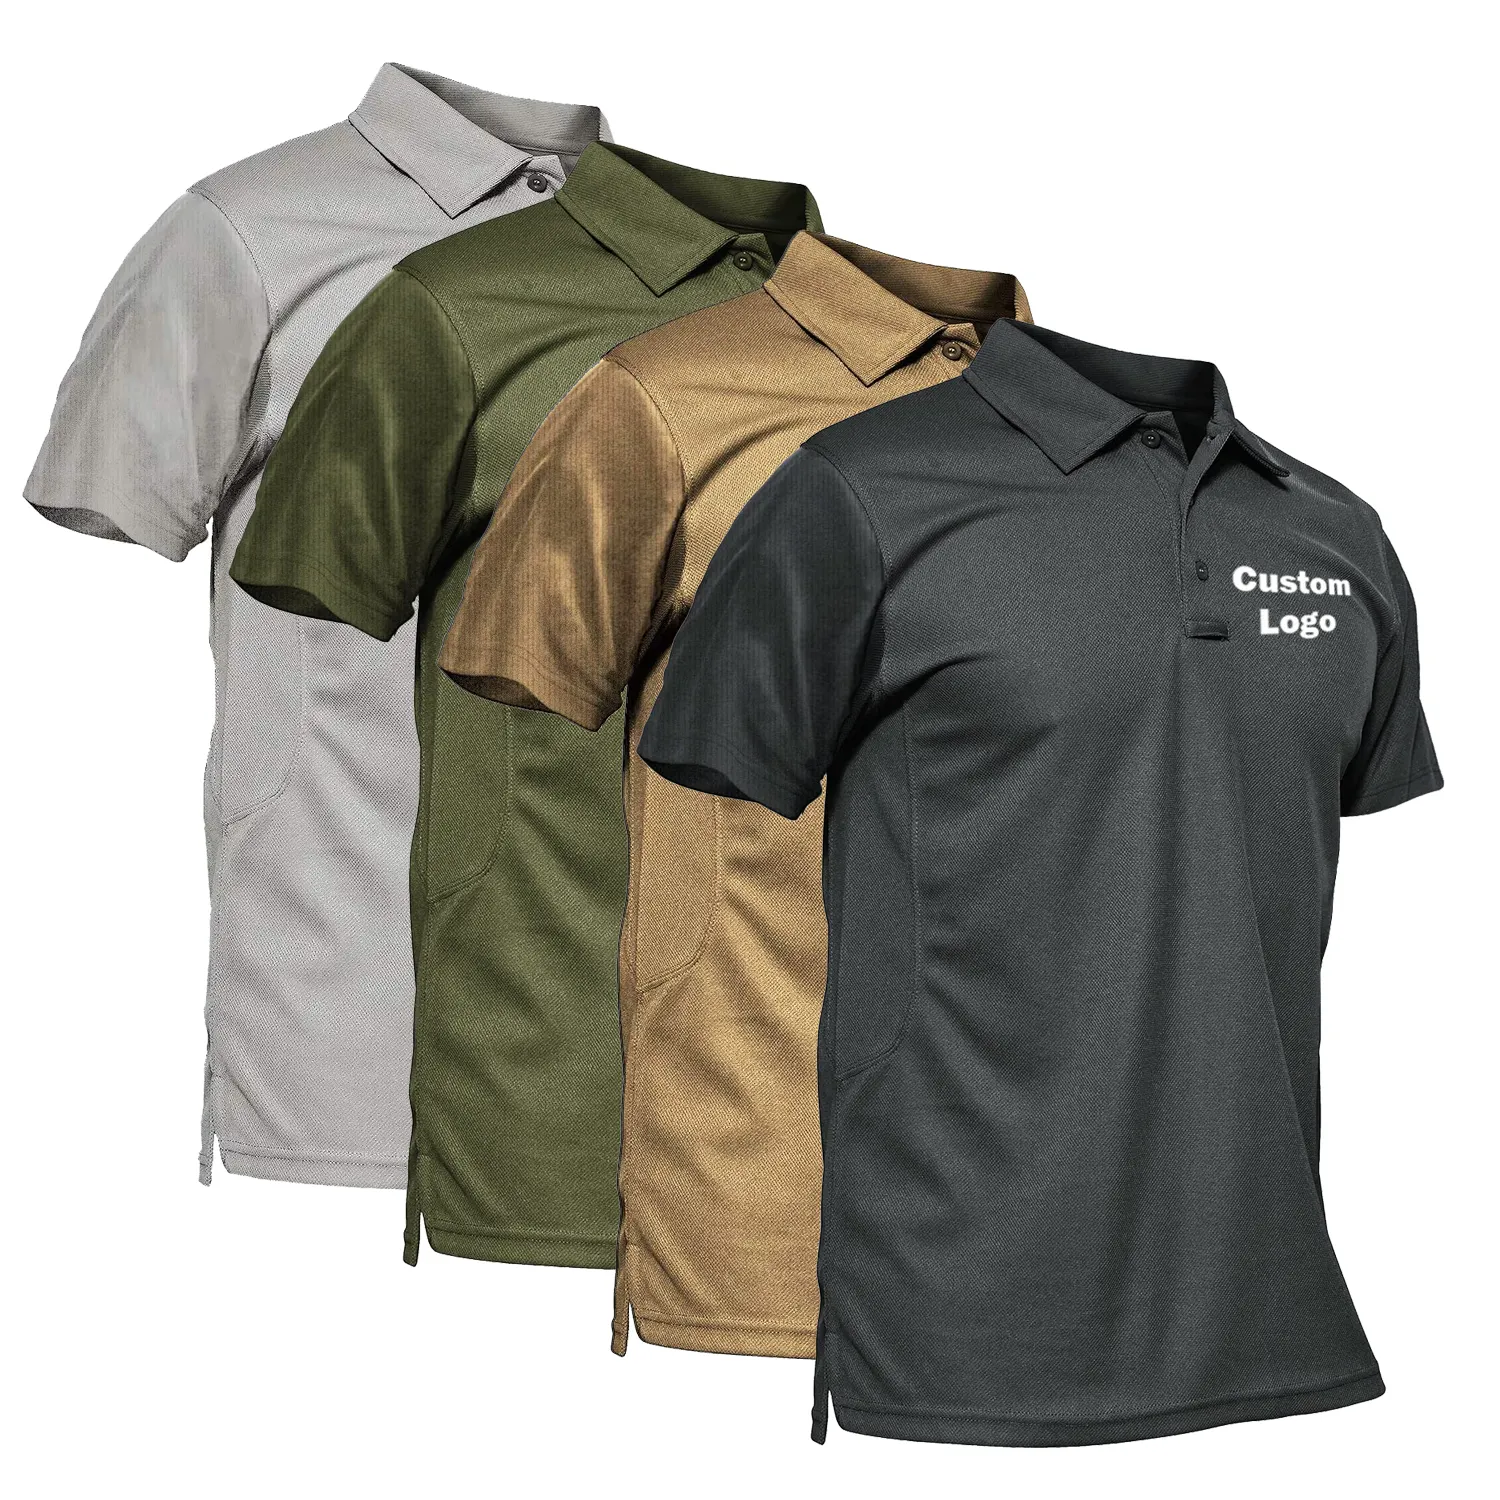 Private Design Multiple Colors Outdoor Performance Tactical Spandex Cotton Men's Summer Polo Shirts